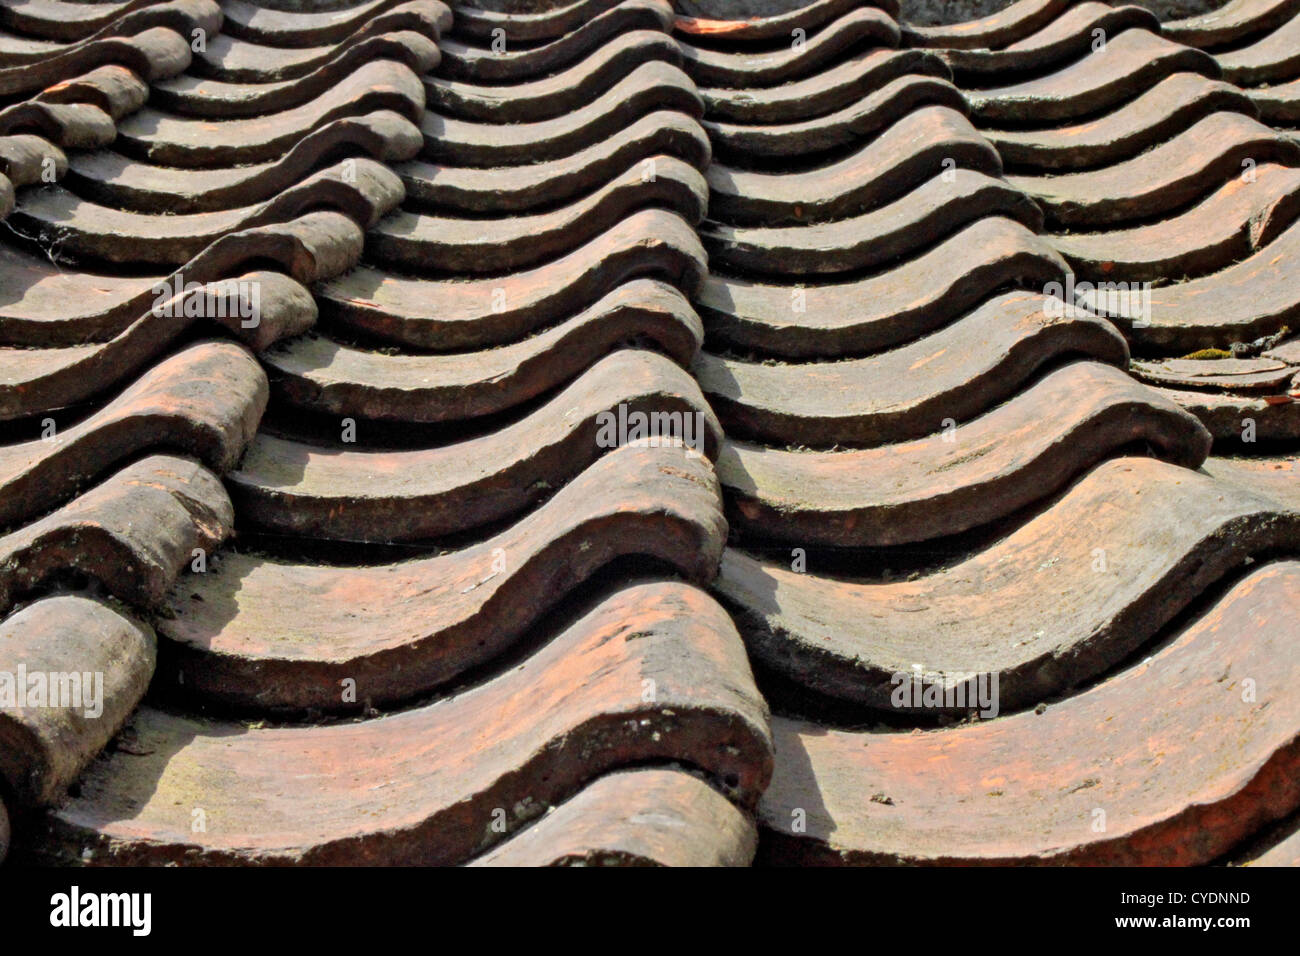 Tile roof Stock Photo